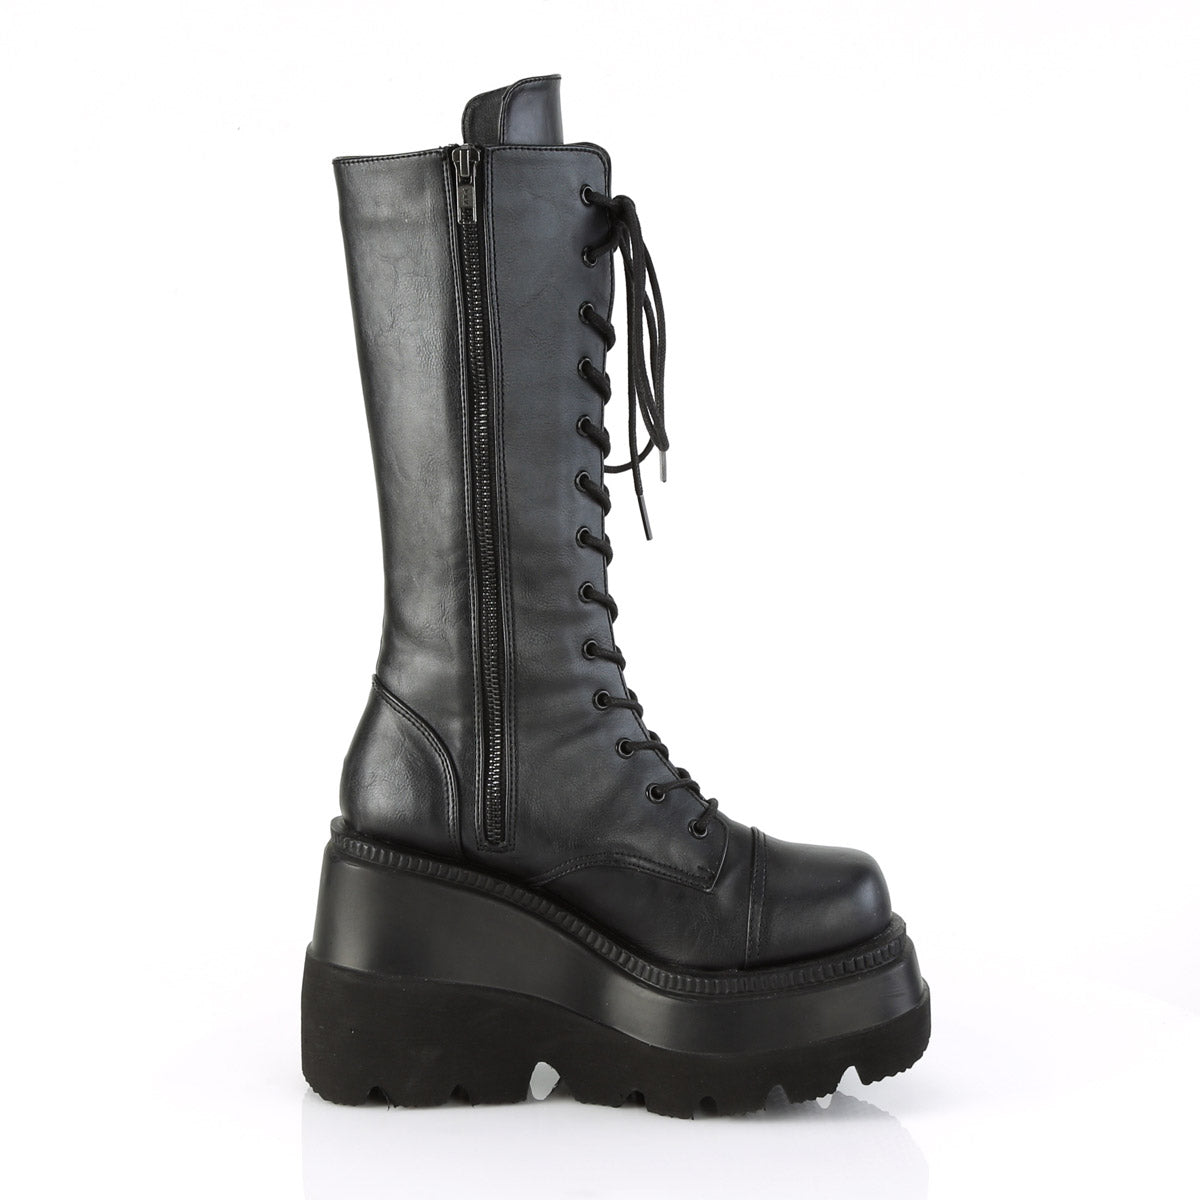 4 1/2" Wedge PF Lace-Up Mid-Calf Boot, Side Zip Pleaser Demonia SHAKER/72